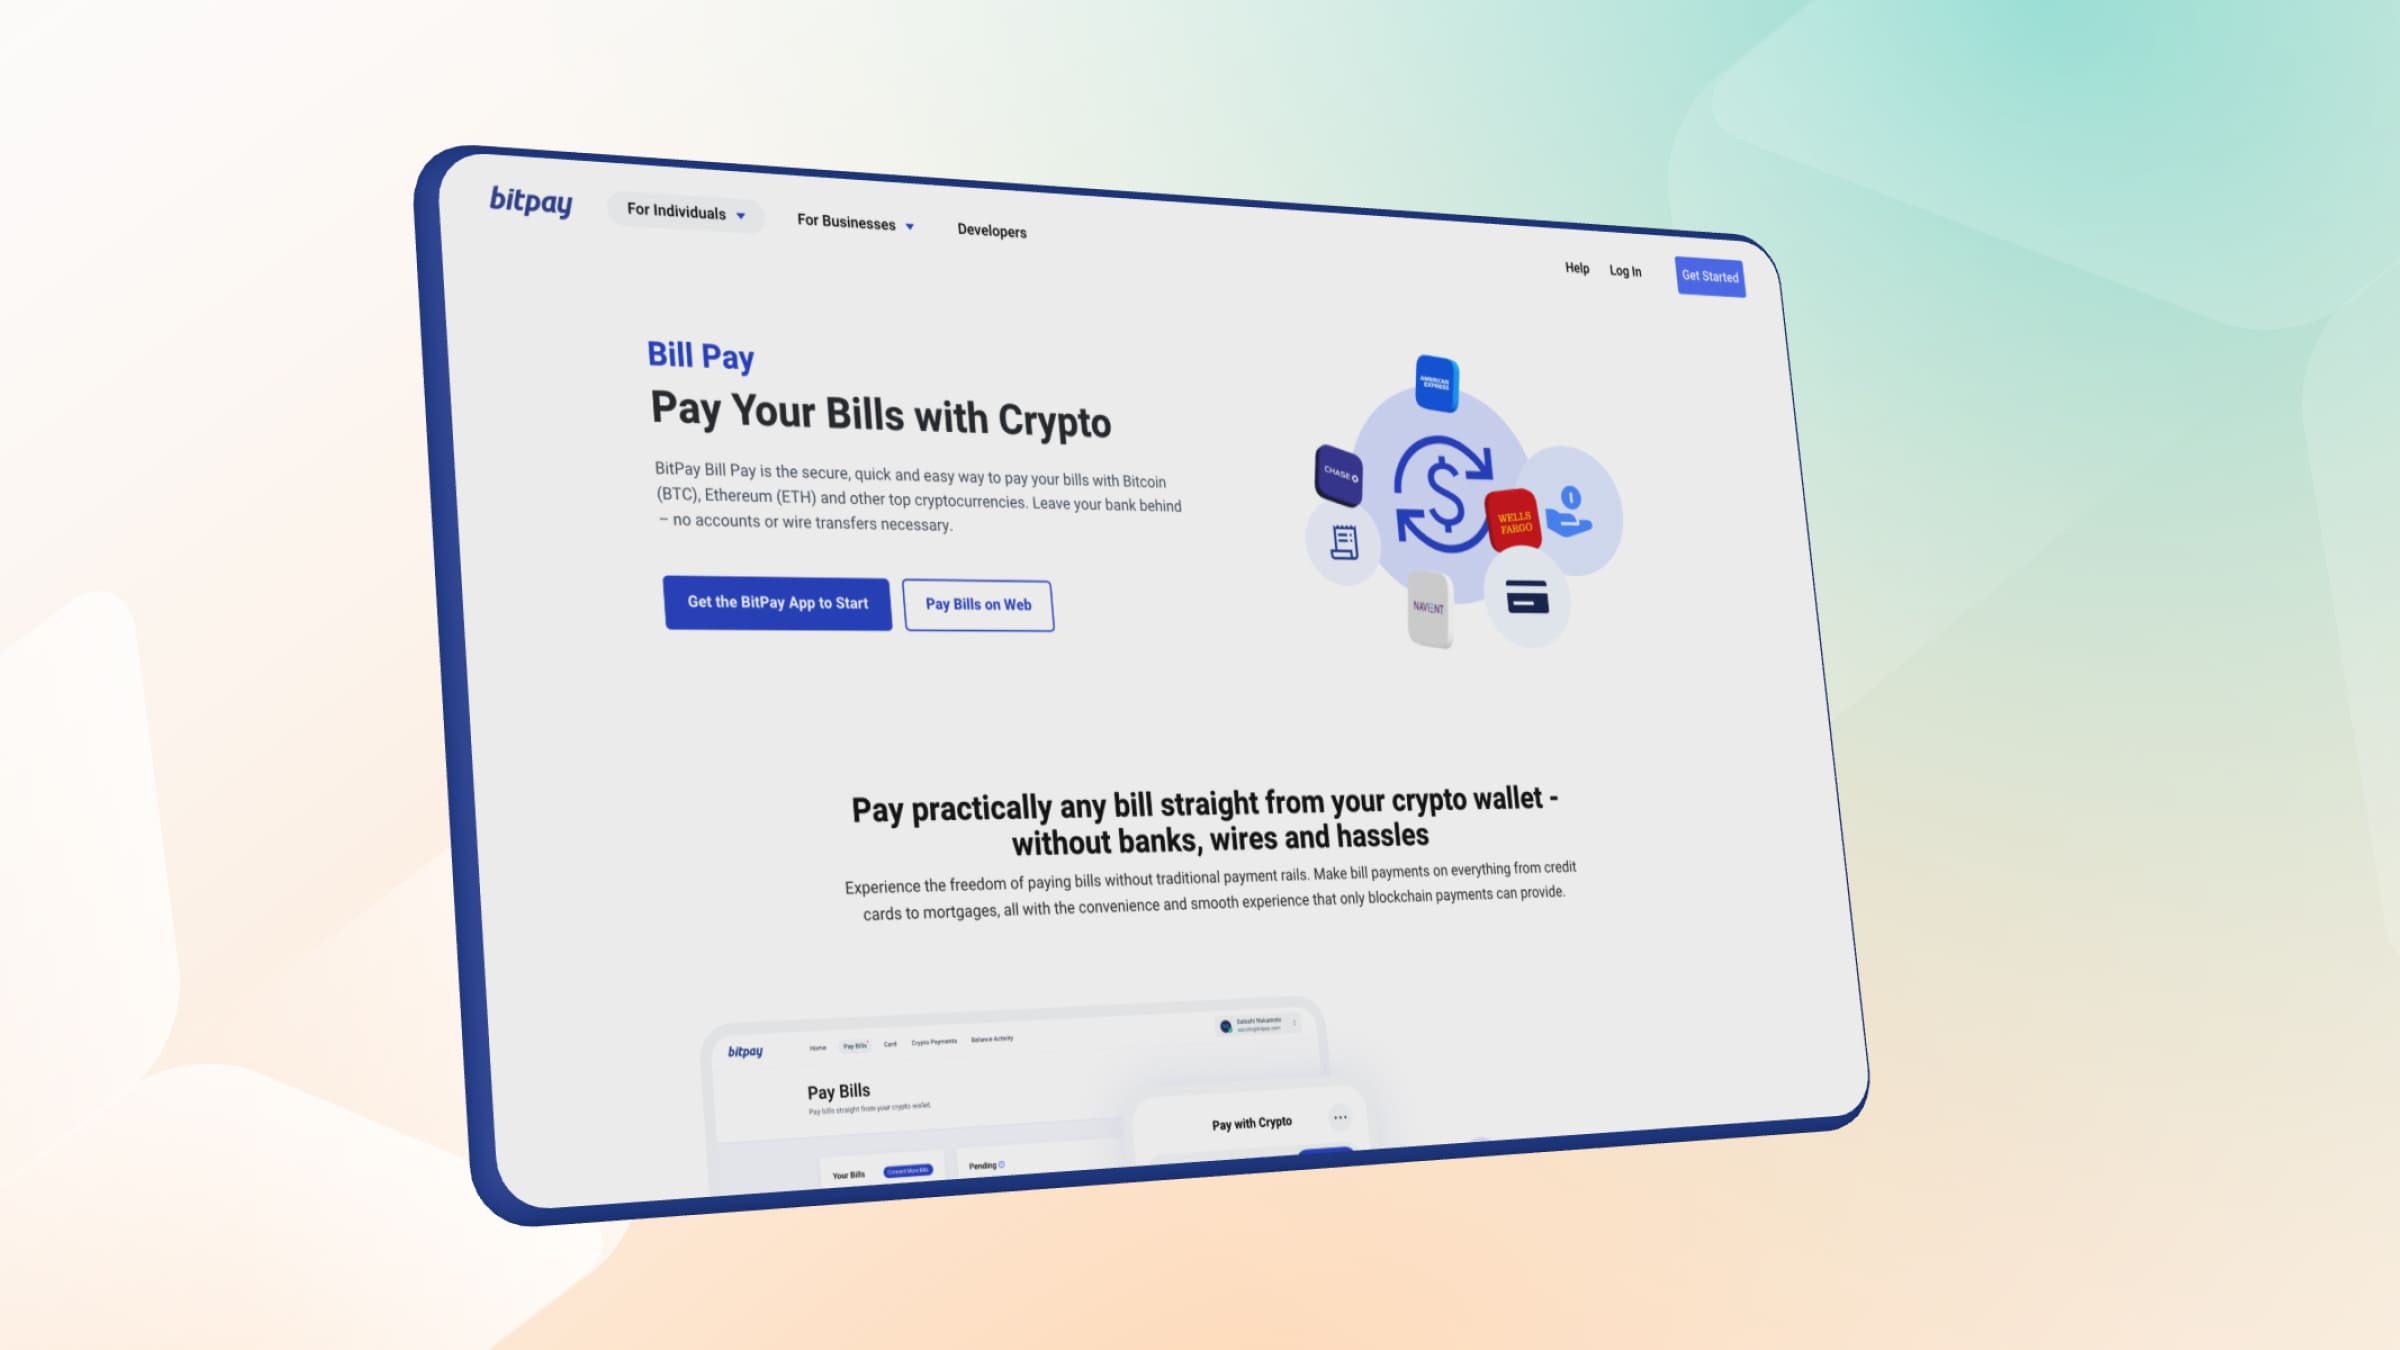 Bill Pay is a tool from BitPay that allows you to pay bills with cryptocurrency.